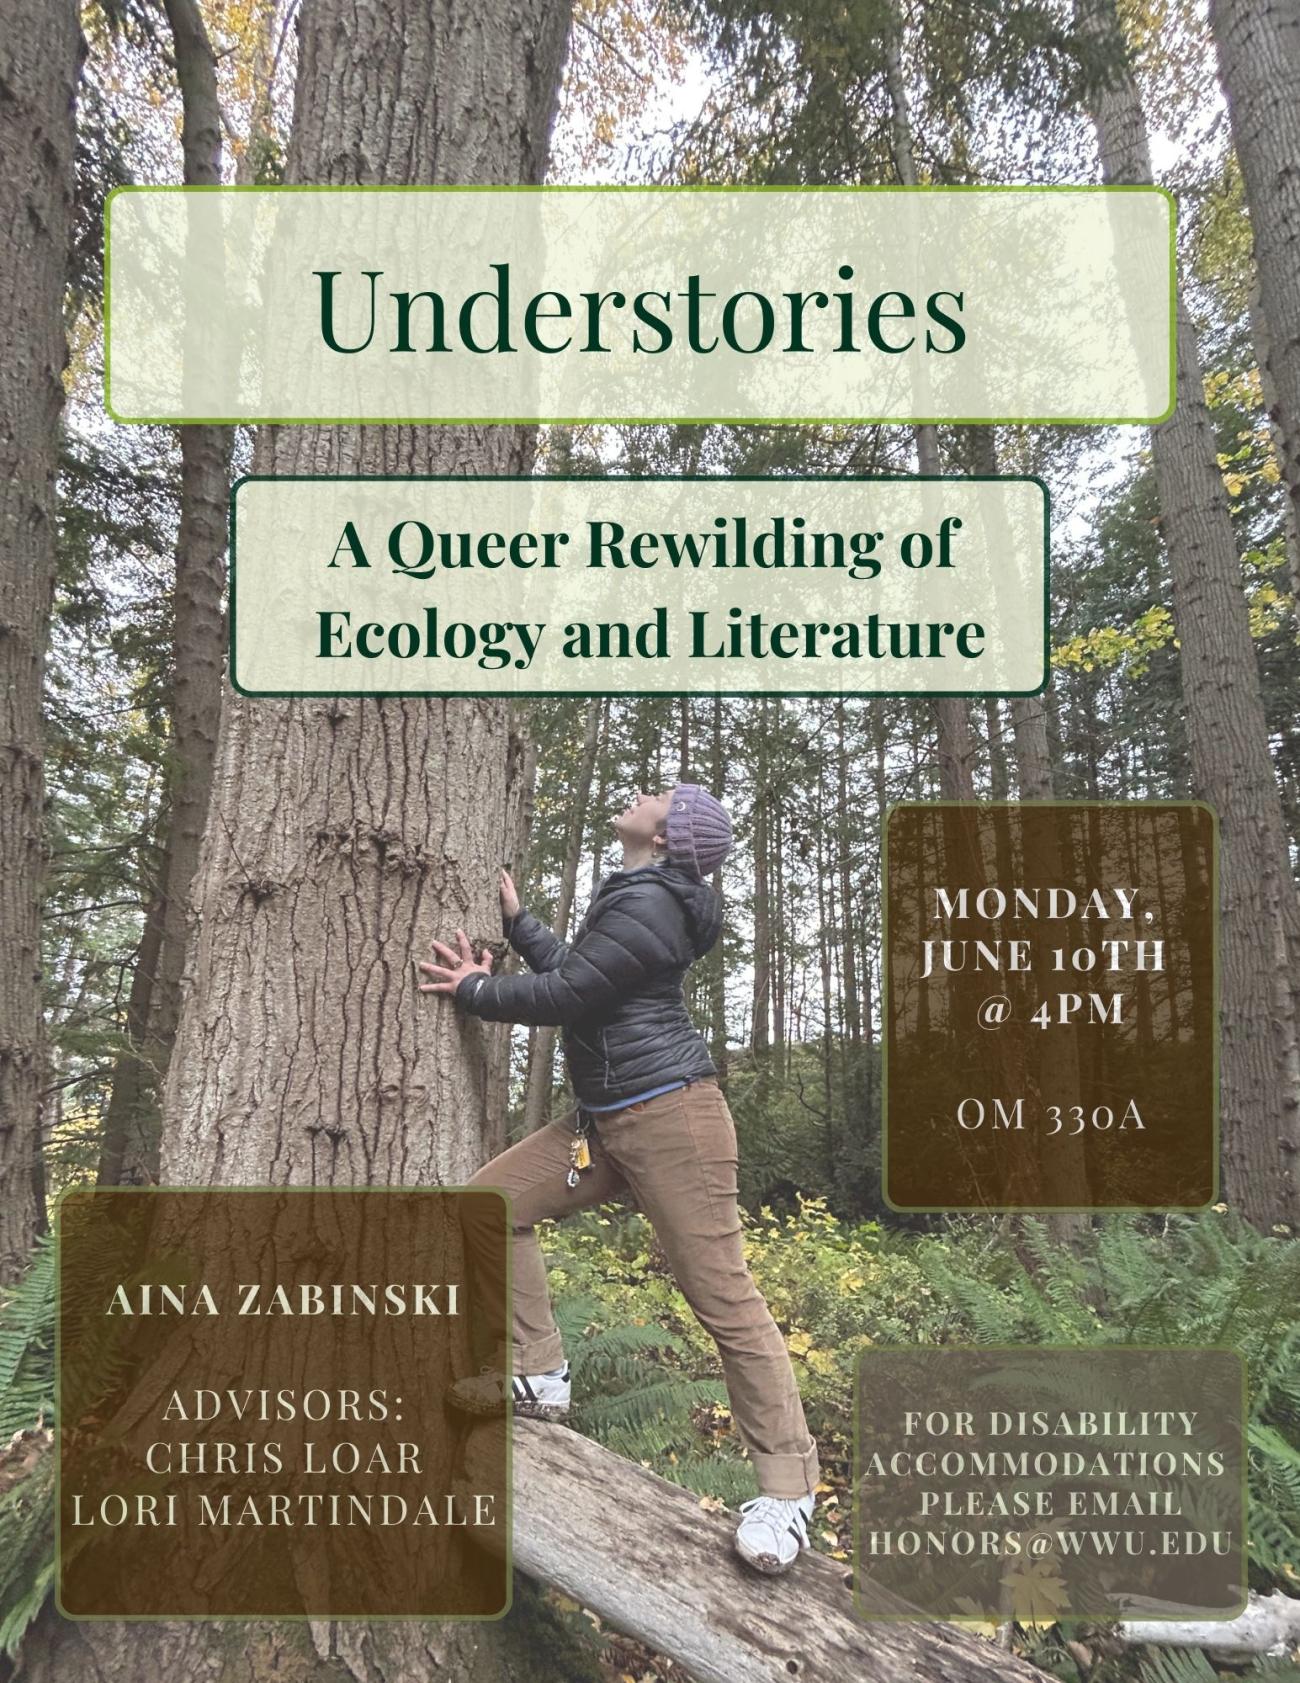 The presenter balances on a fallen log and leans against the trunk of a fir tree with palms stretched out against the bark; the forest understory and ferns in the undergrowth fill out the background. The text reads "Understories: A Queer Rewilding of Ecology and Literature. Aina Zabinski. Advisors: Chris Loar and Lori Martindale. Monday, June 10th at 4pm, OM 330A. For Disability Accommodations, please email honors@wwu.edu.”